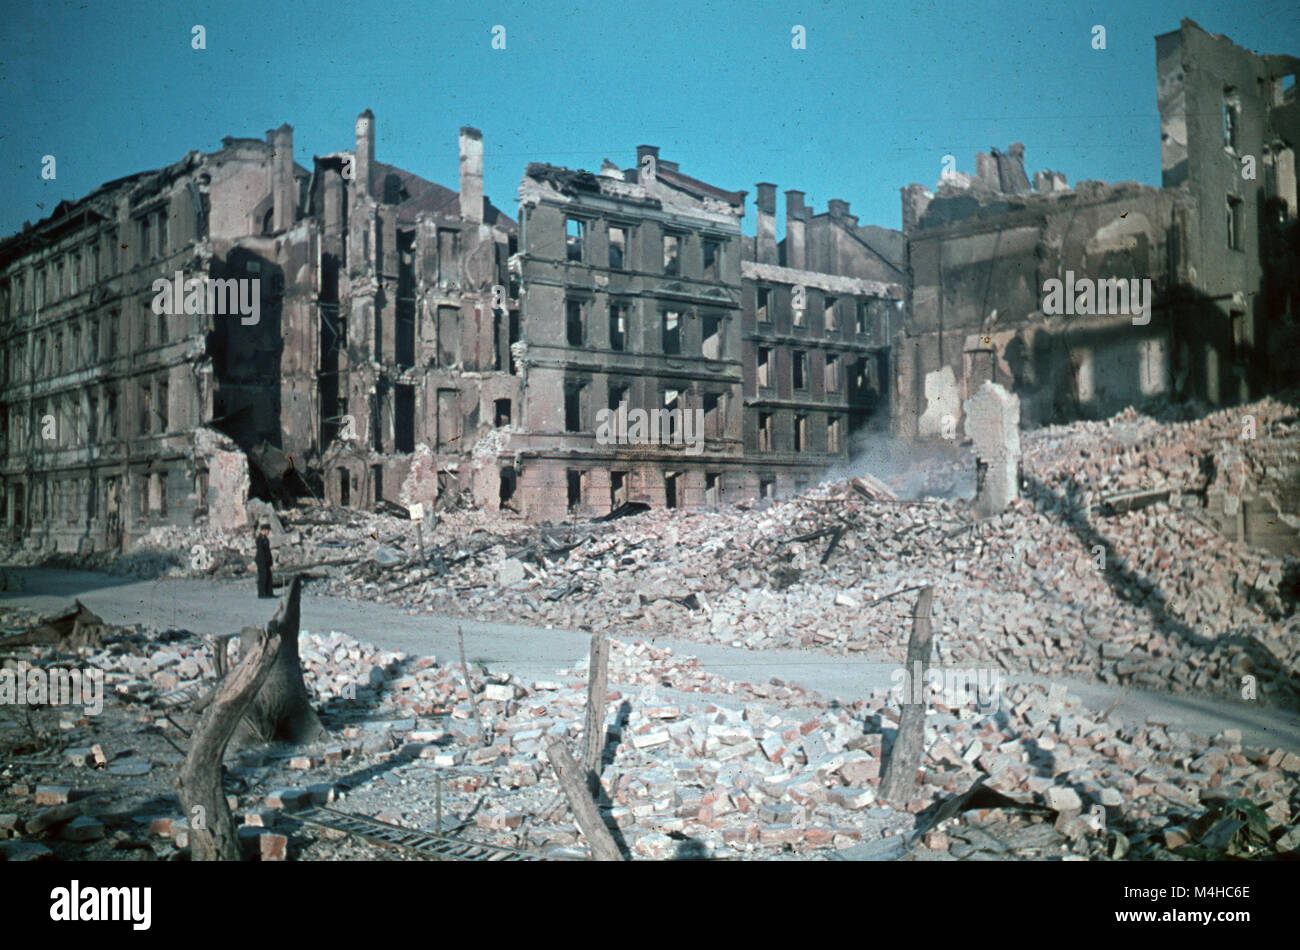 art destroyed in wwii